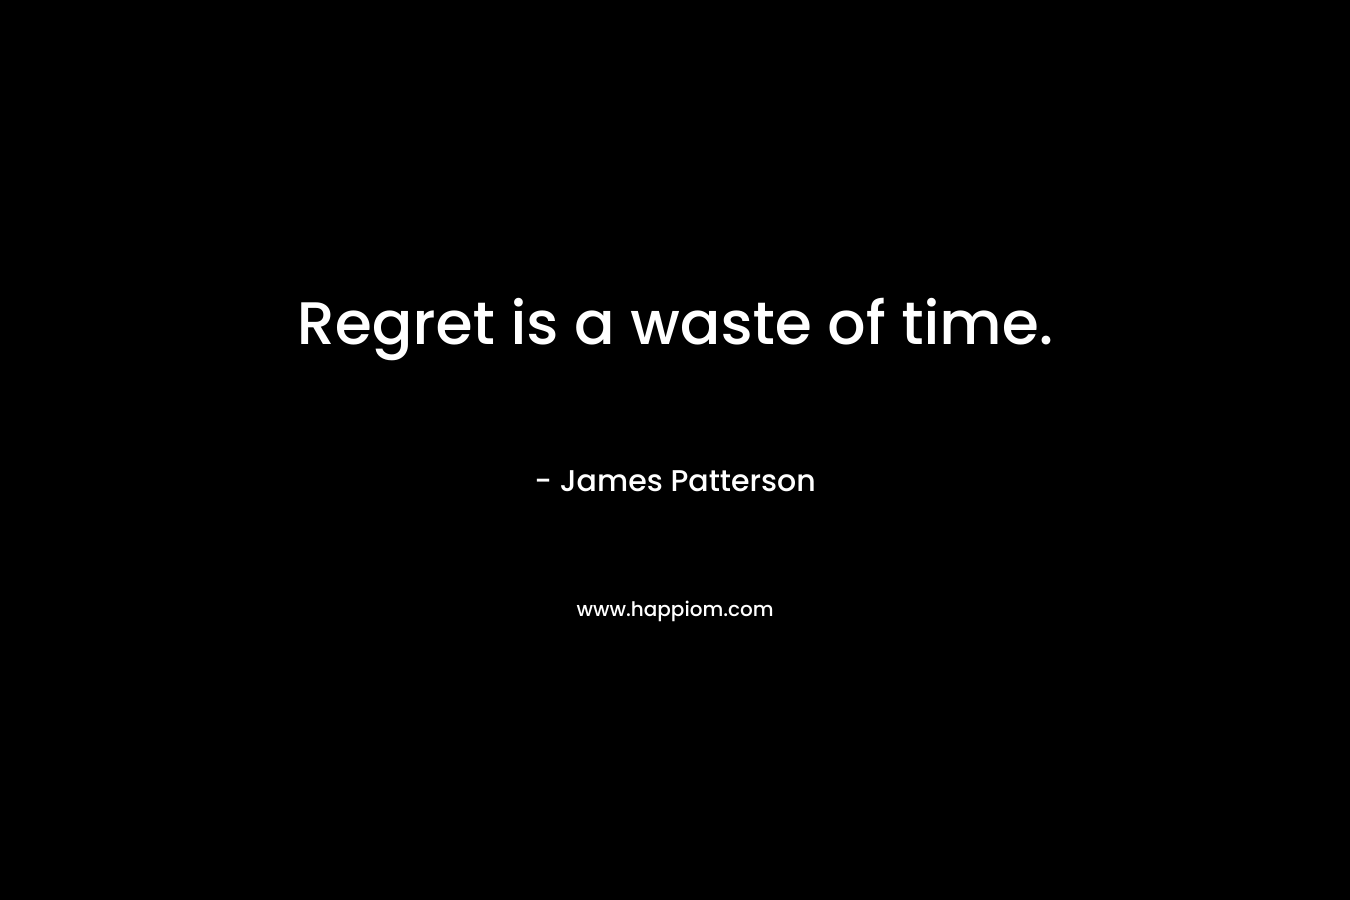 Regret is a waste of time. – James Patterson